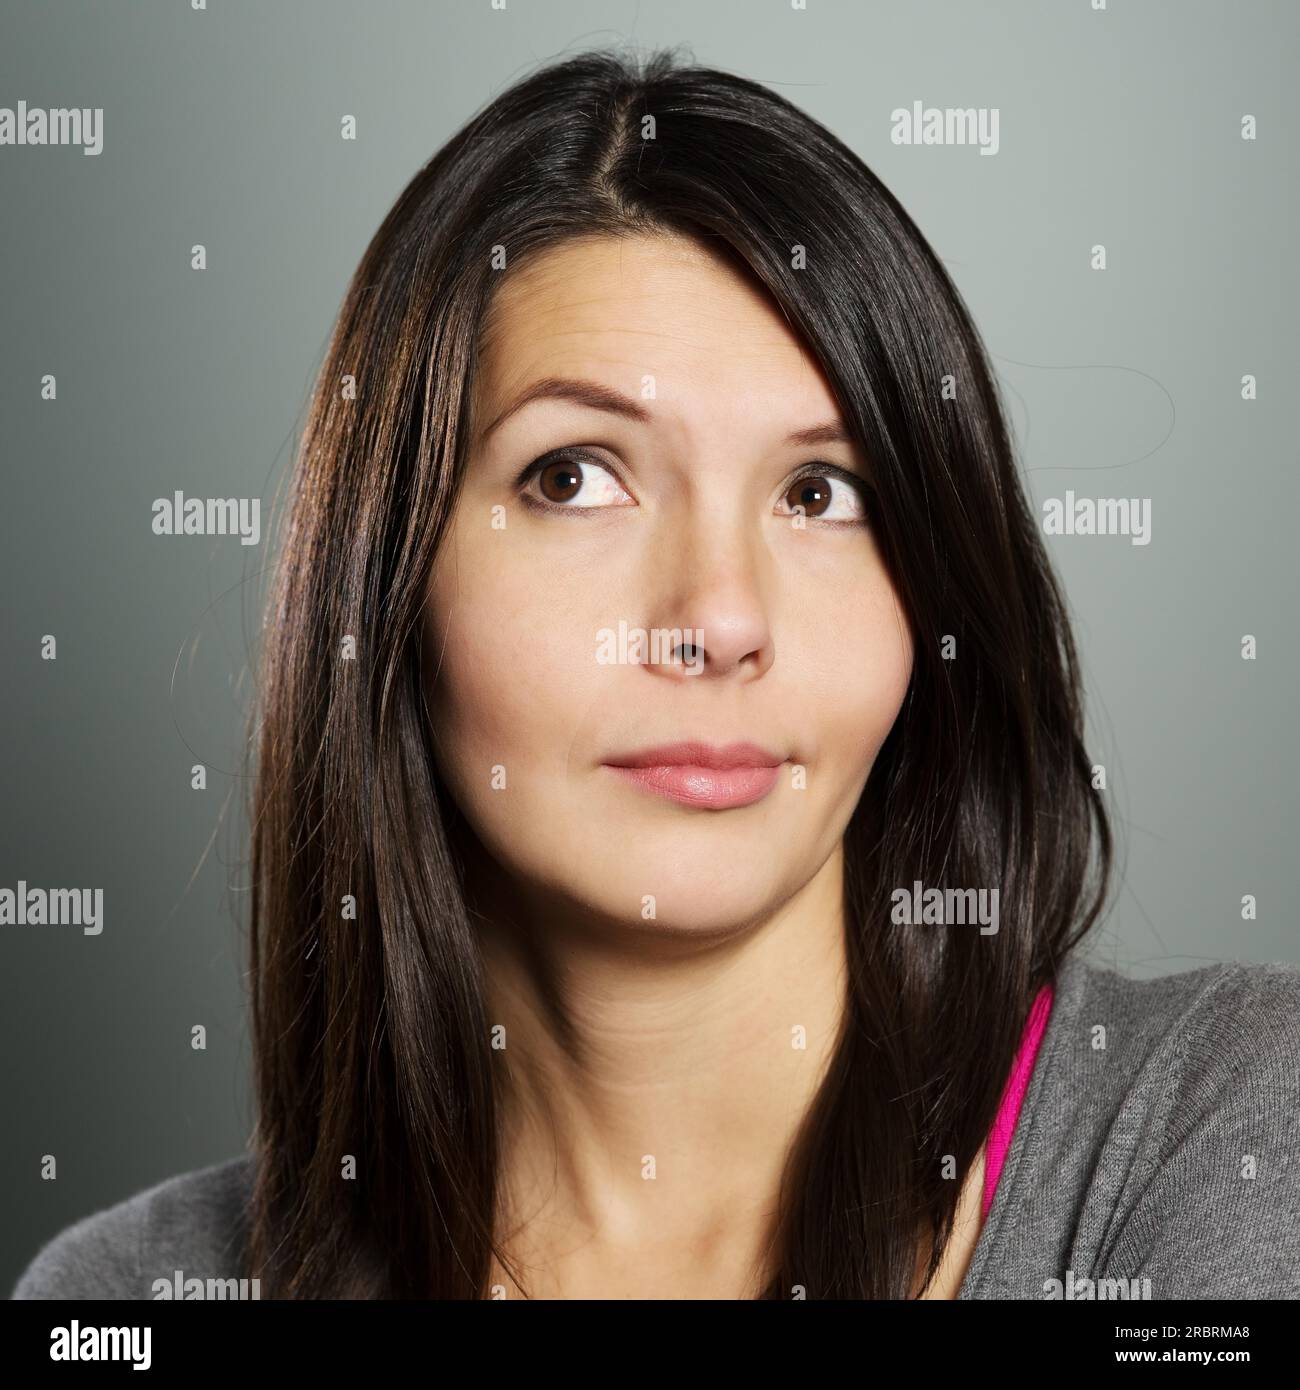 Attractive woman with a sceptical bemused expression standing with folded arms pulling a wry face as she looks upwards into the air Stock Photo